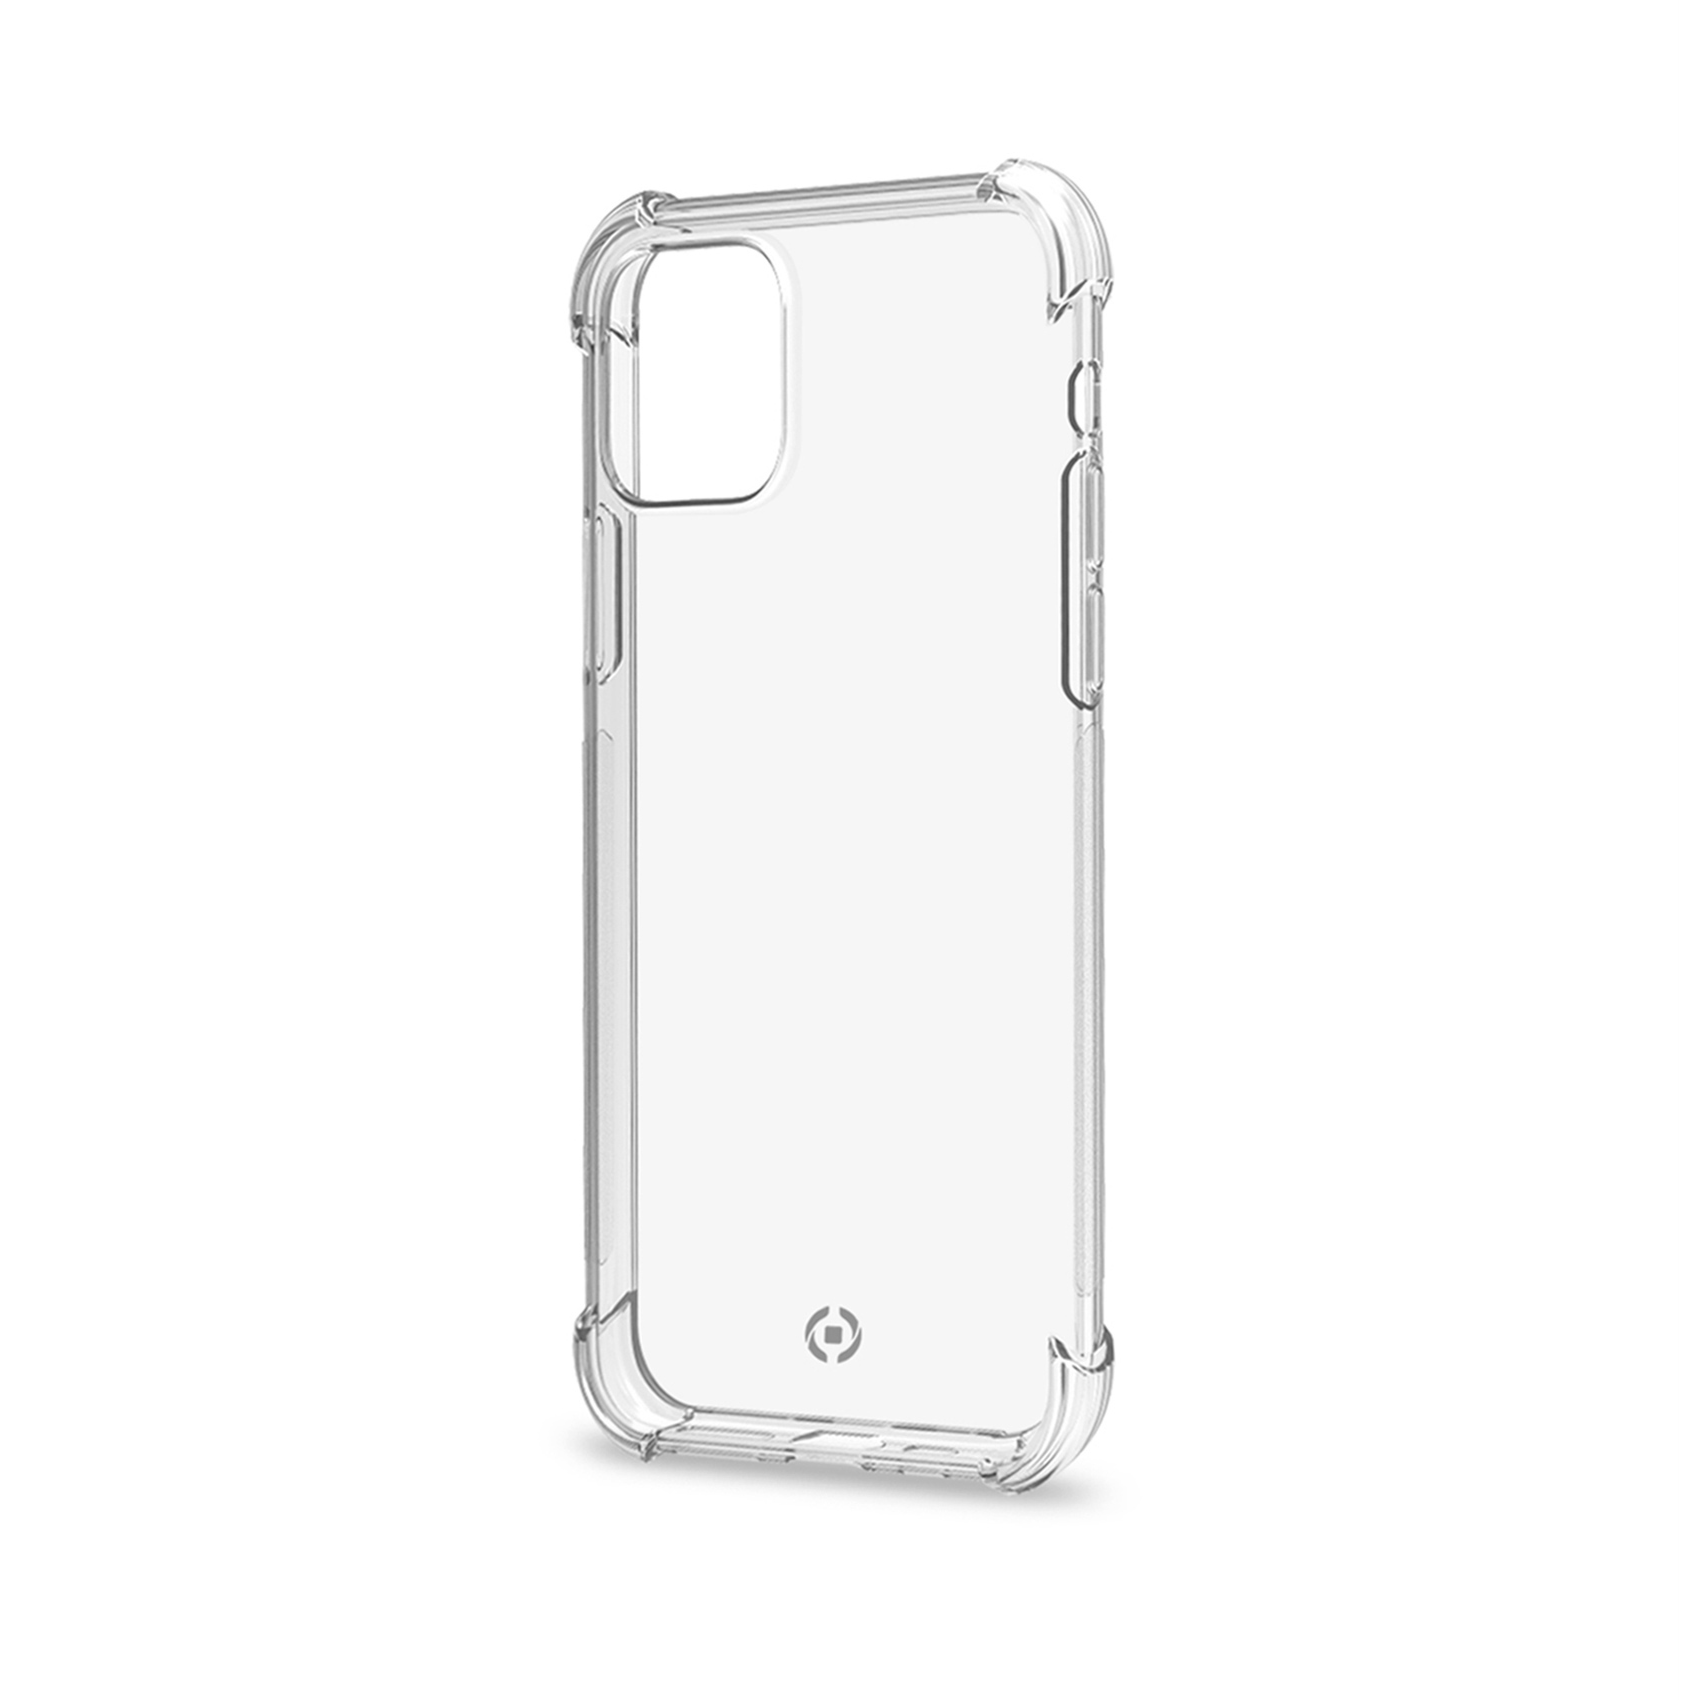 Armorgel Iphone 11 Promax Wh Celly Armorgel1002wh 8021735753681